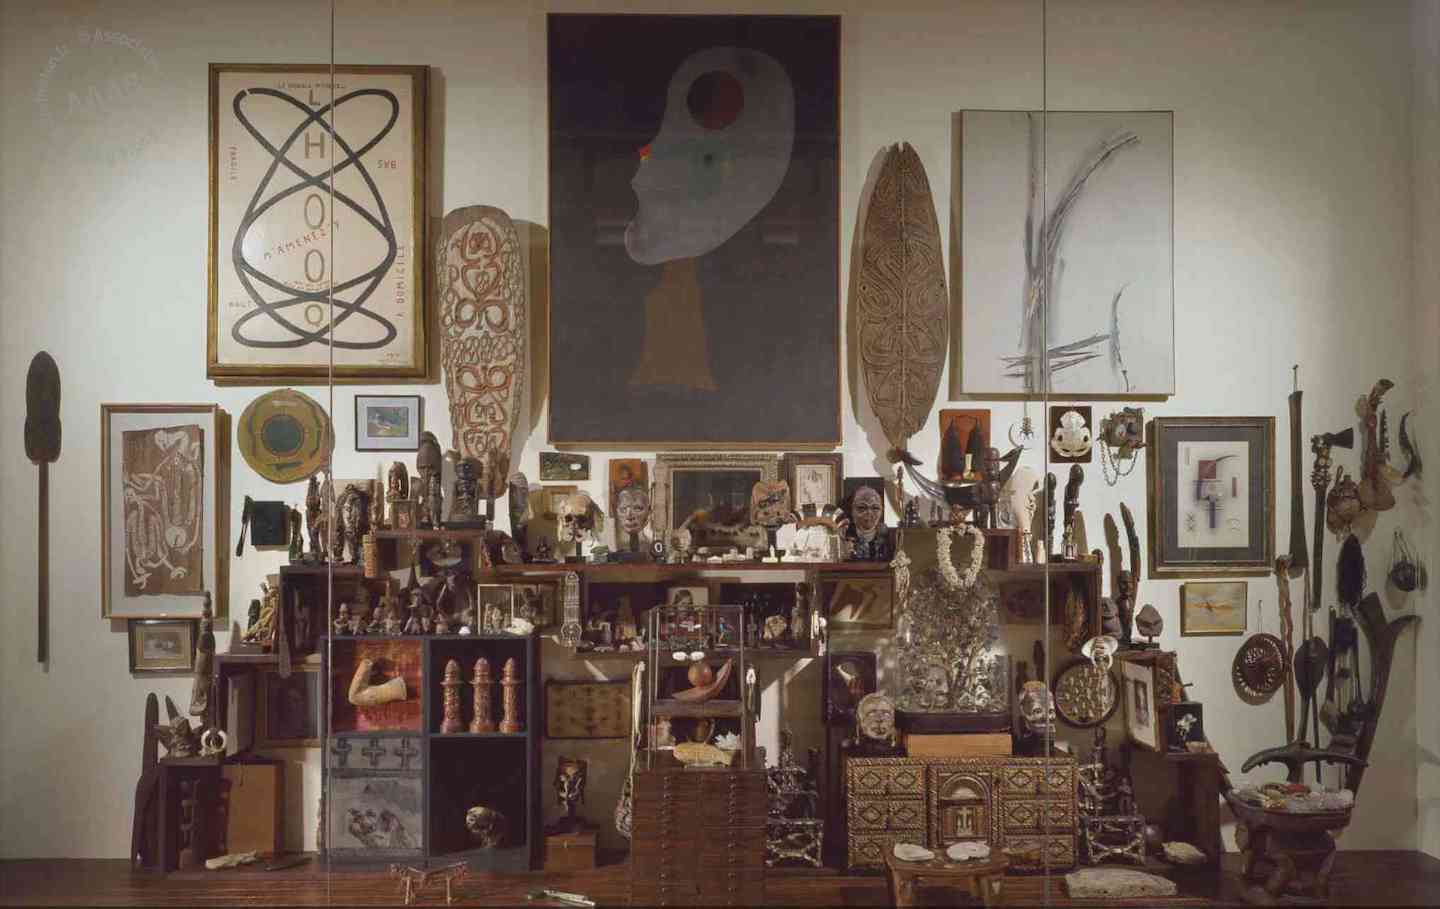 "André Breton, Wall from his Paris Apartment"